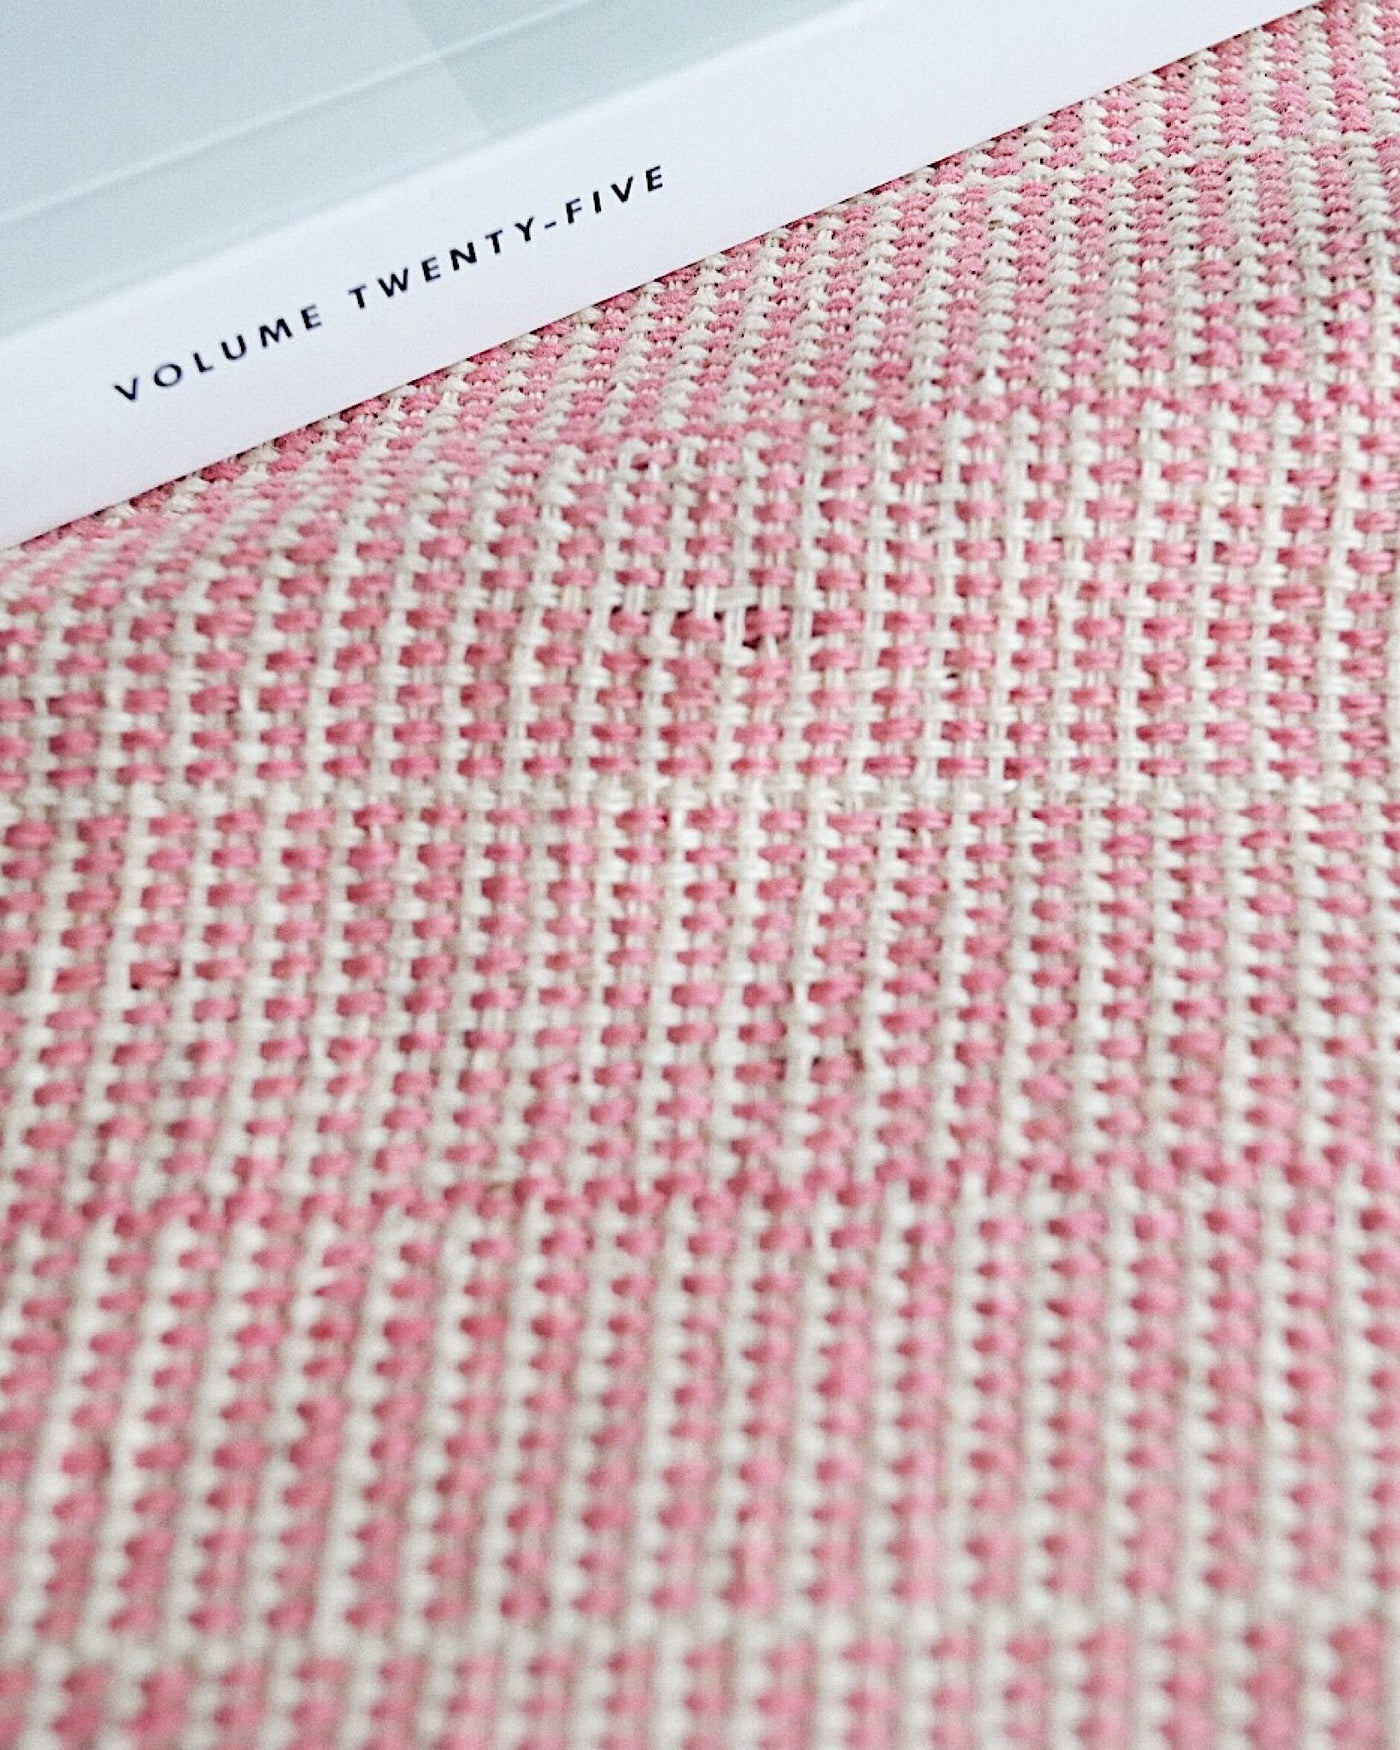 Vintage Hand Woven Table Runner, Throw | Olive & Iris